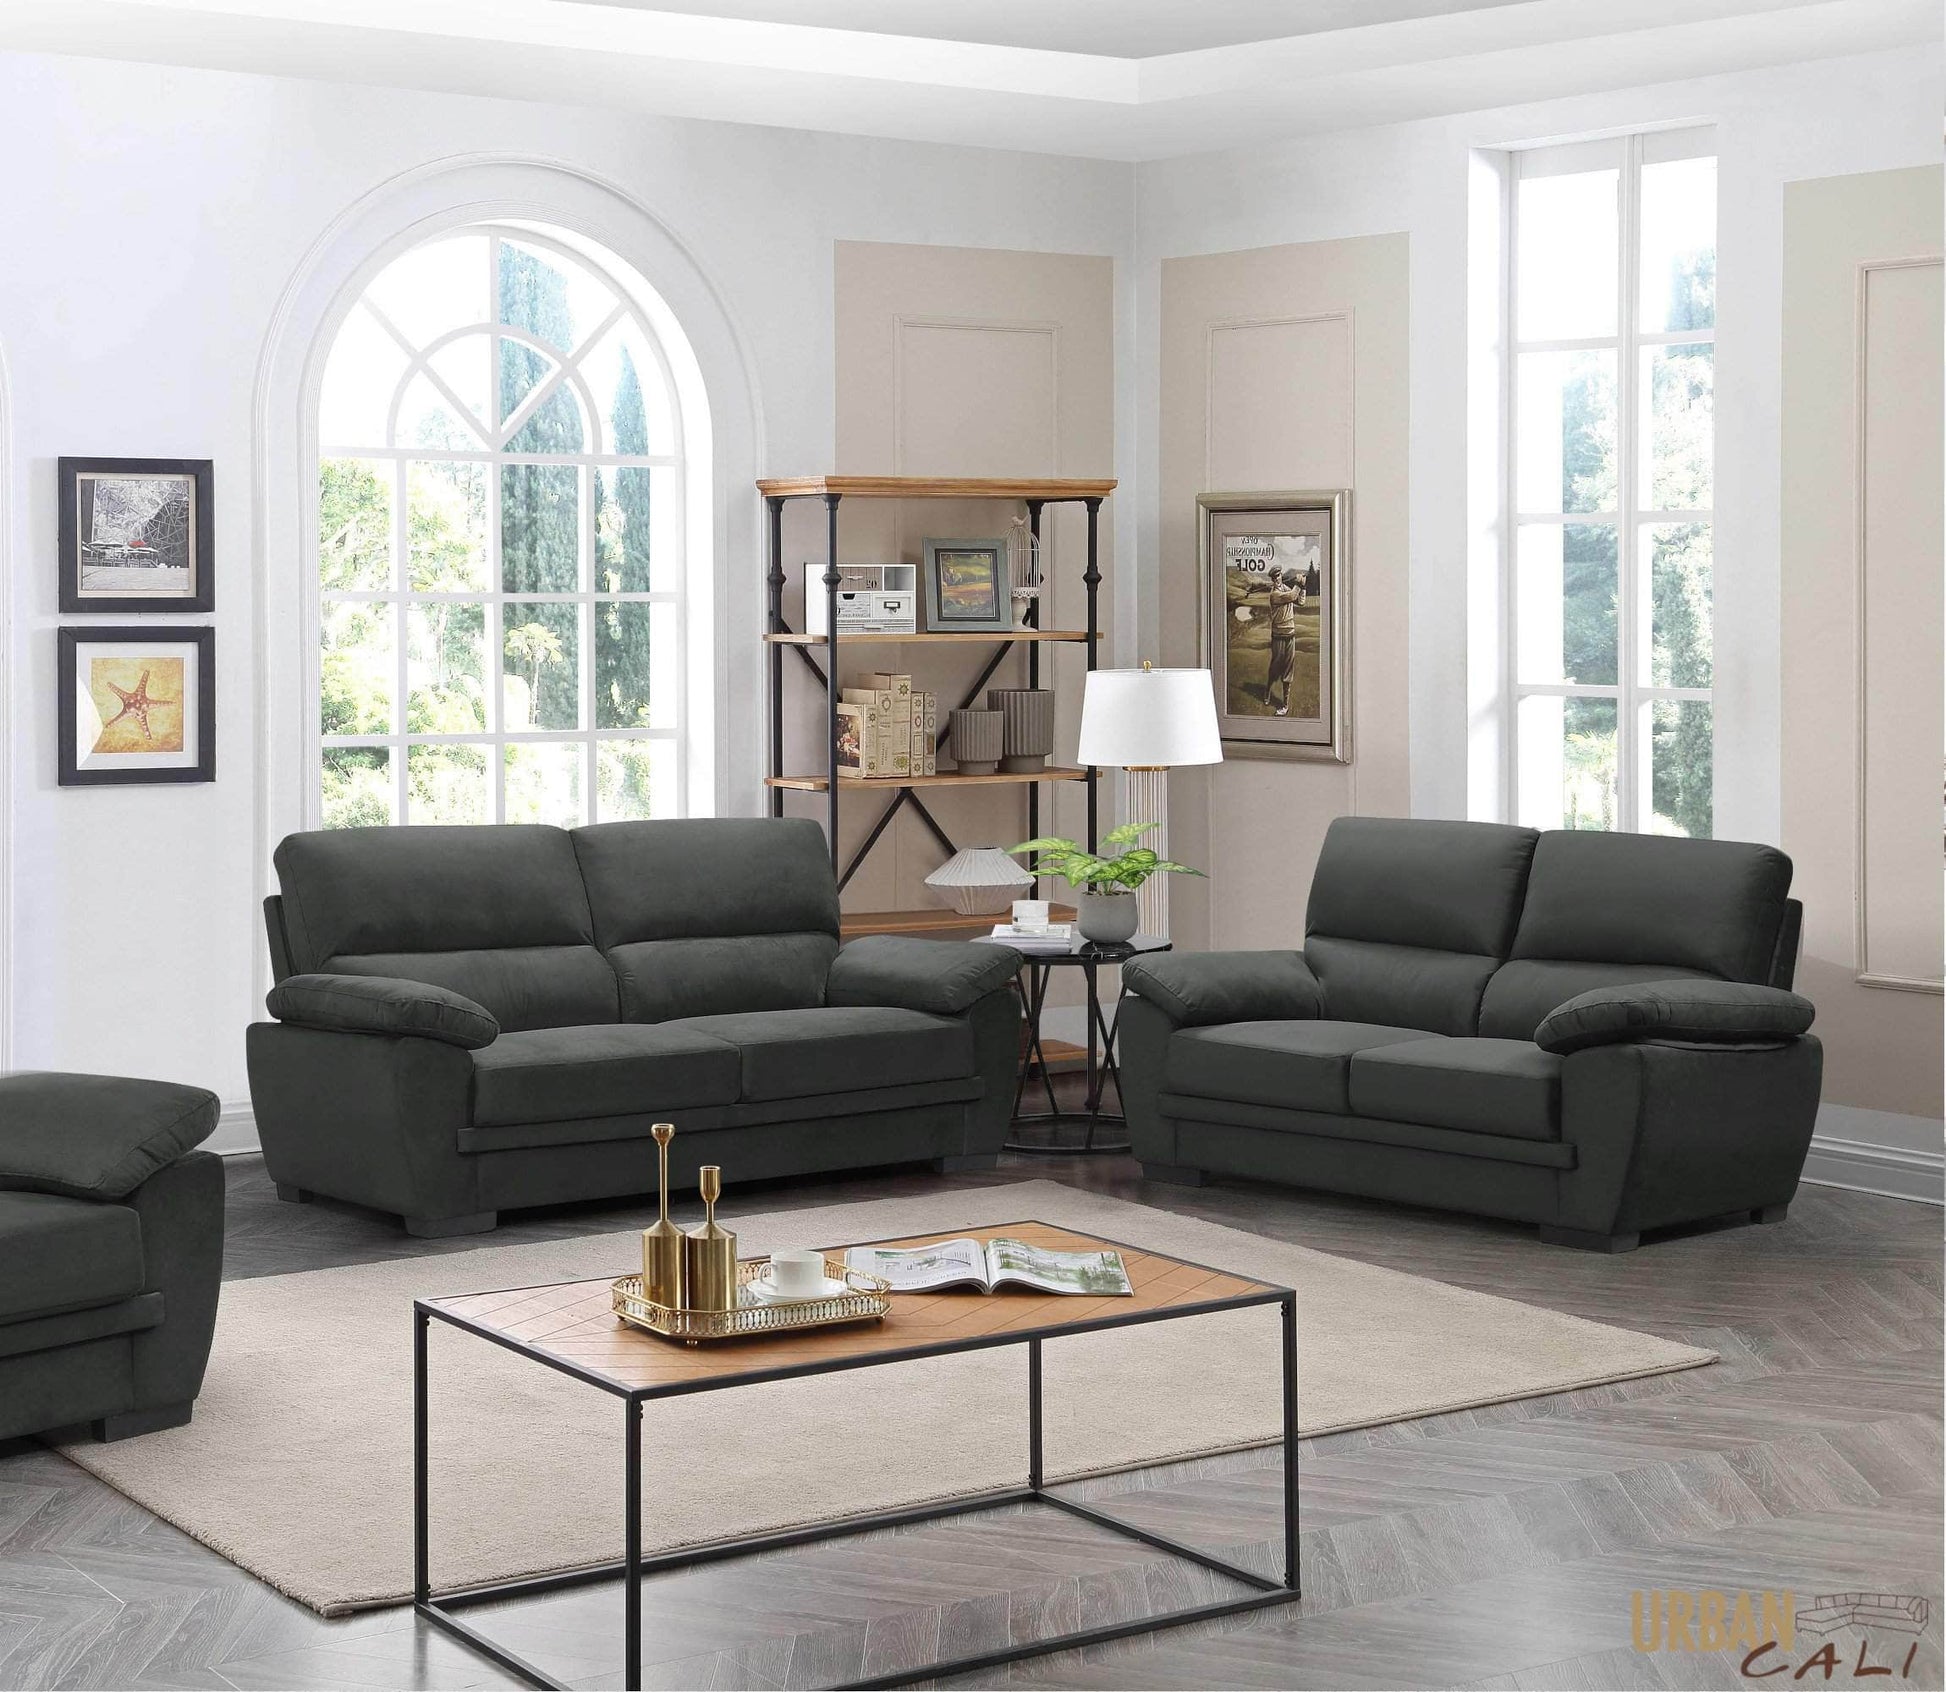 Pending - Urban Cali Monterey 2 Piece Pillow Top Arm Sofa and Loveseat Set in Cotton Fabric - Available in 2 Colours